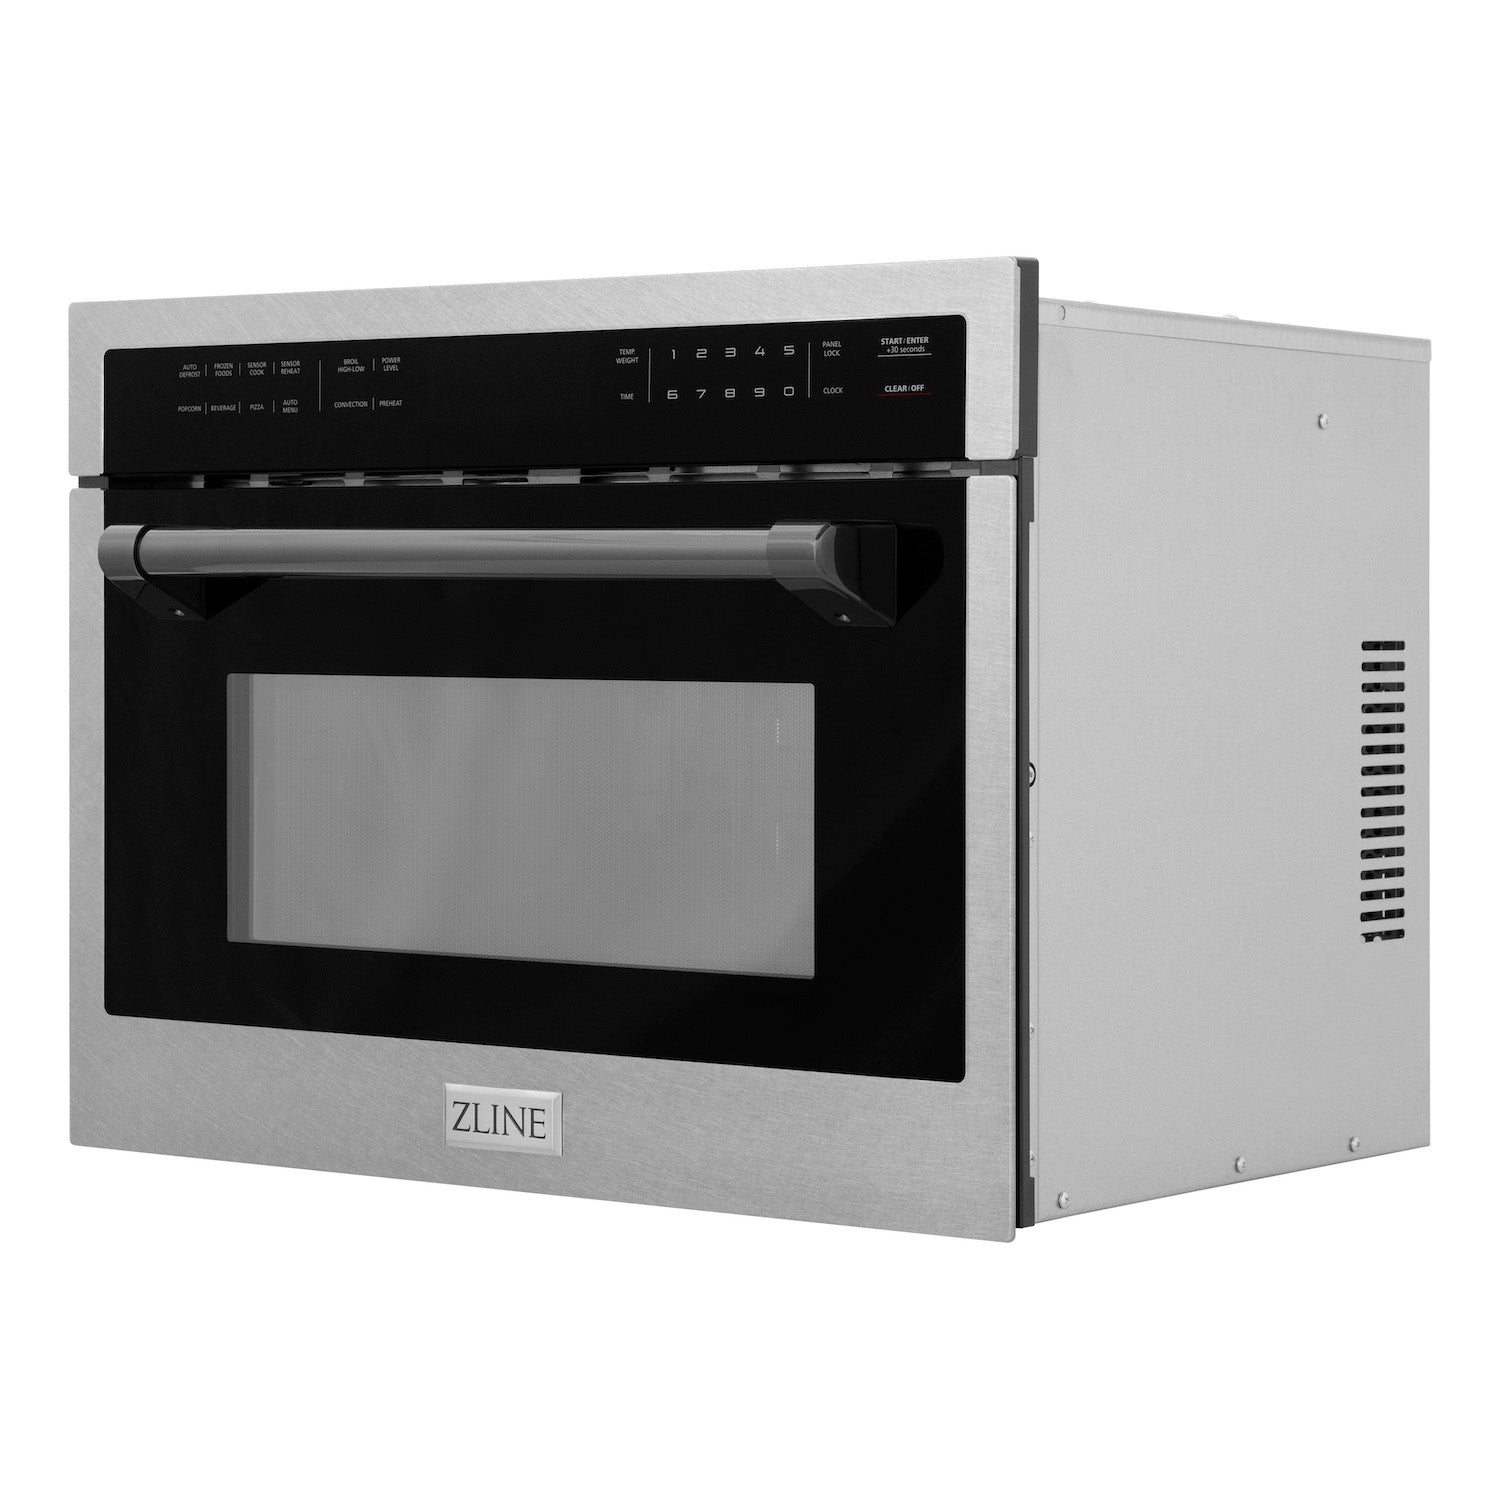 ZLINE Autograph Edition 24 in. 1.6 cu ft. Built-in Convection Microwave Oven in DuraSnow Stainless Steel with Matte Black Accents side with door closed.